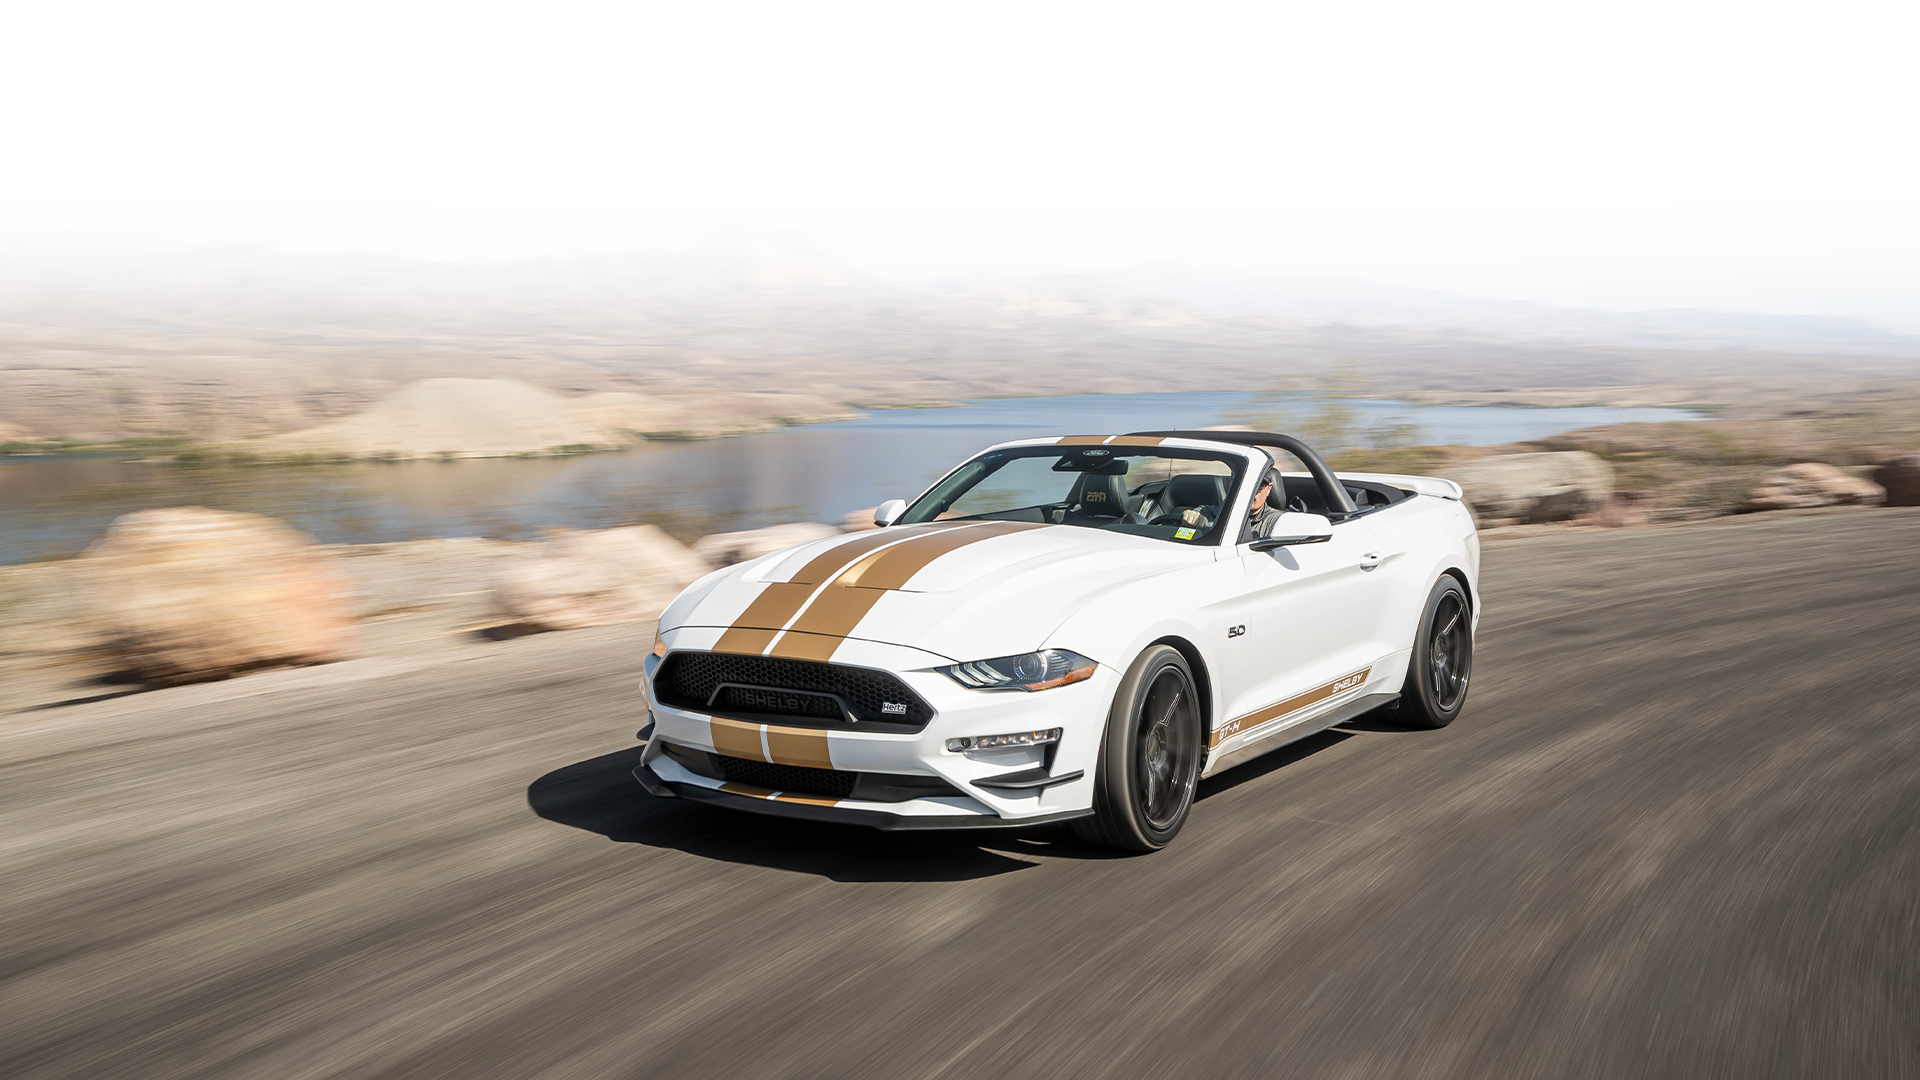 Forget Boring Rental Cars: Rent a Limited-Edition Shelby GT-H Mustang from Hertz Instead